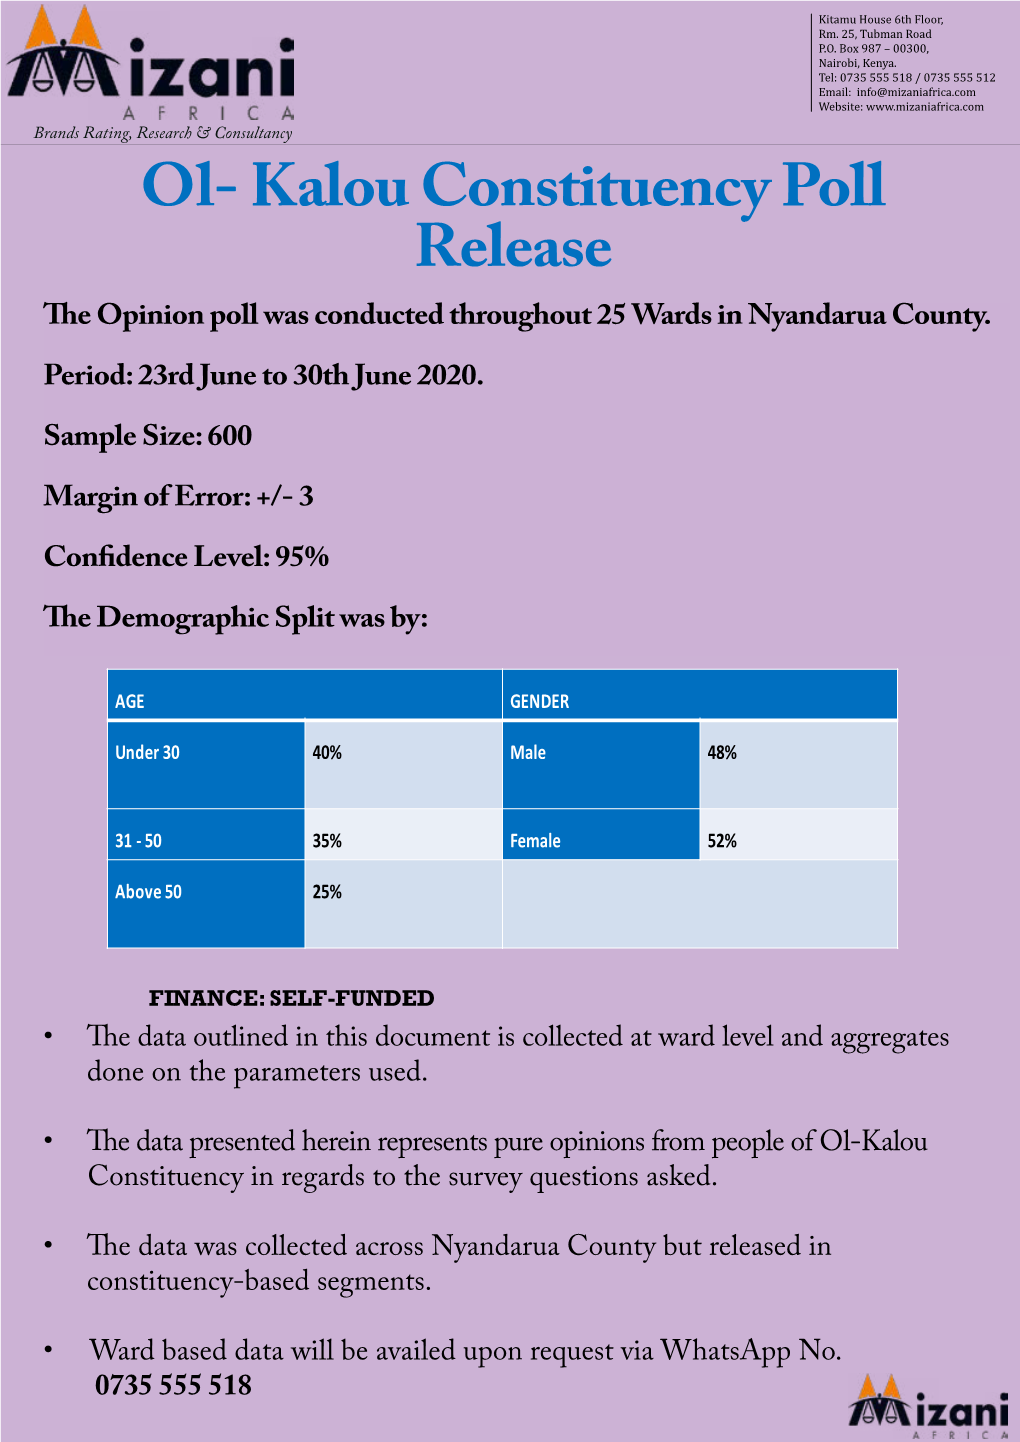 Ol- Kalou Constituency Poll Release the Opinion Poll Was Conducted Throughout 25 Wards in Nyandarua County